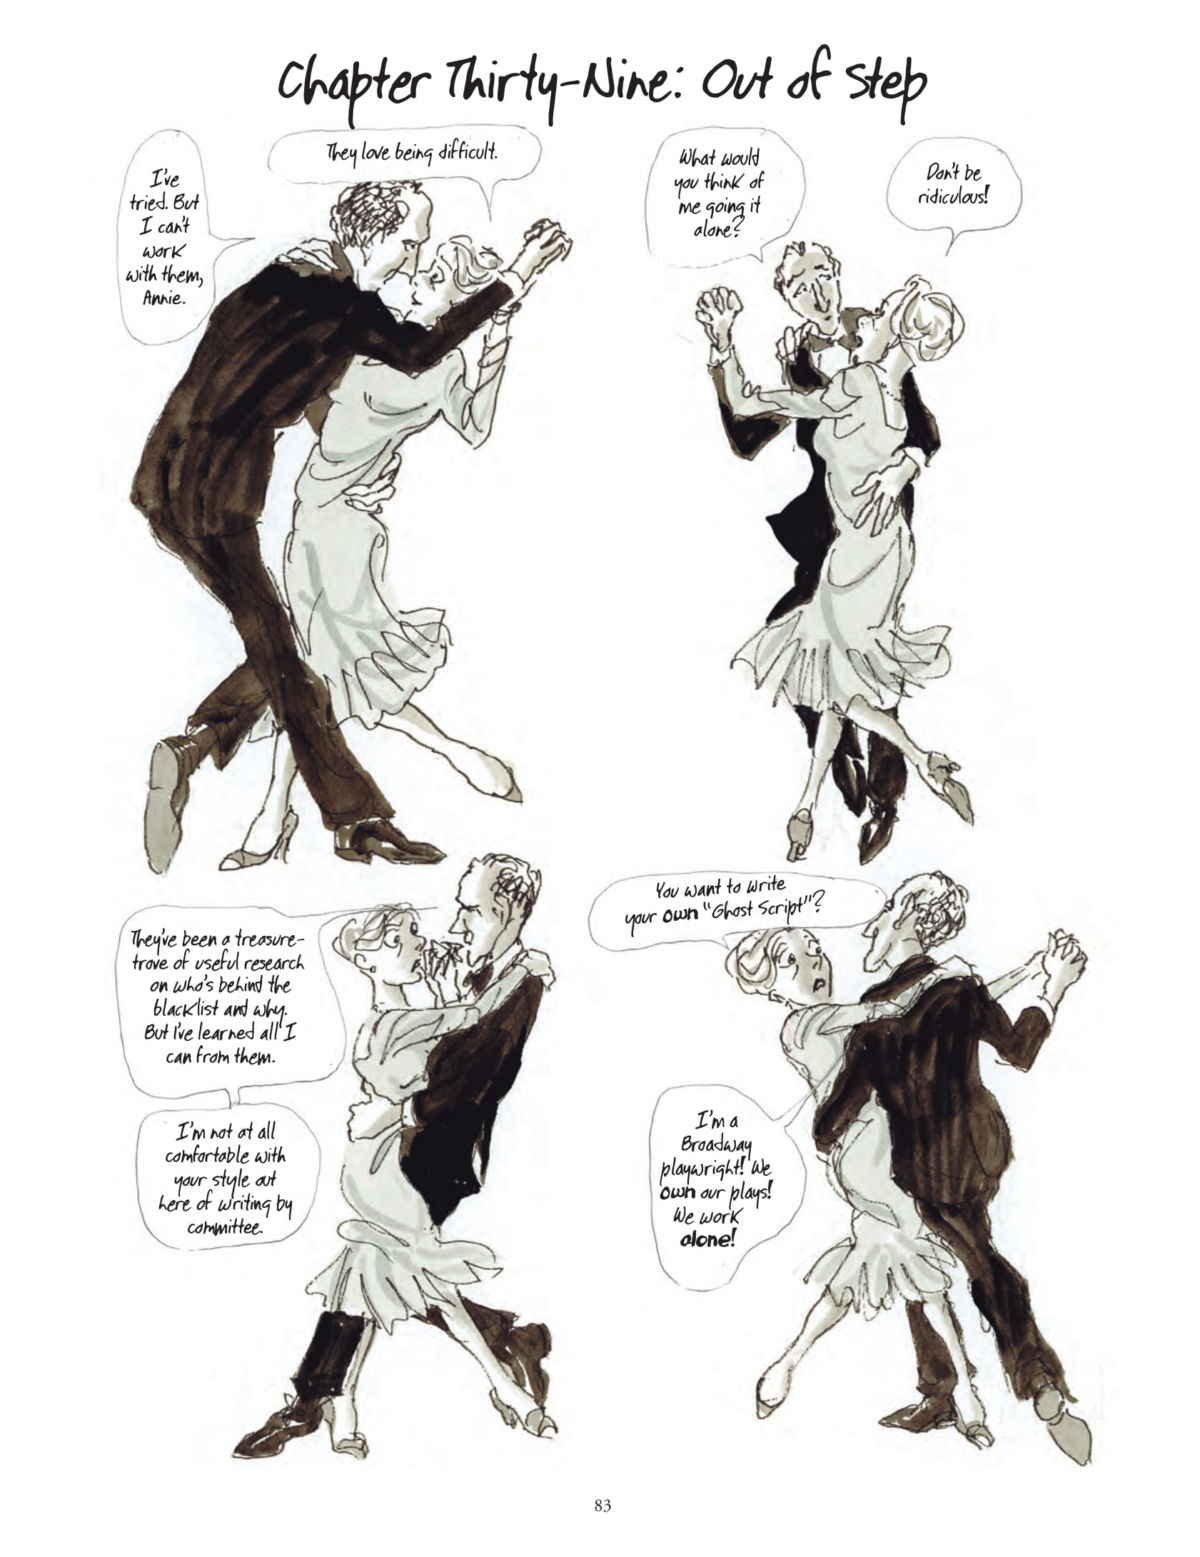 Reprinted from The Ghost Script: A Graphic Novel by Jules Feiffer, with permission of the publisher, Liveright Publishing Corporation. Copyright © 2018 by B. Mergendeiler Corp. All rights reserved.